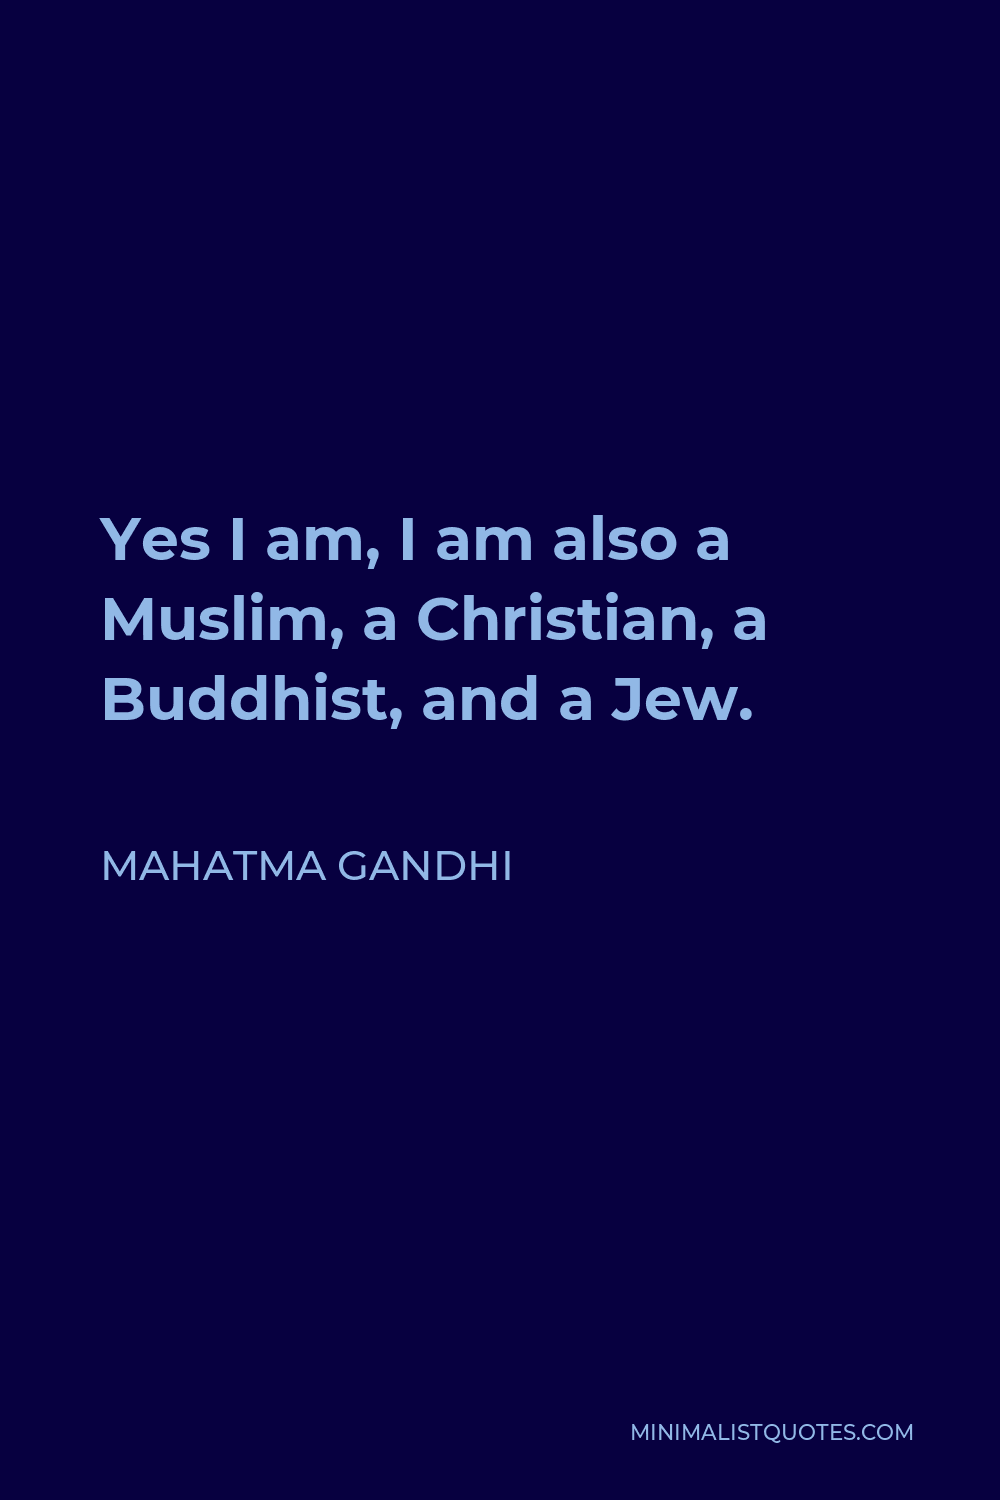 Mahatma Gandhi Quote - Yes I am, I am also a Muslim, a Christian, a Buddhist, and a Jew.